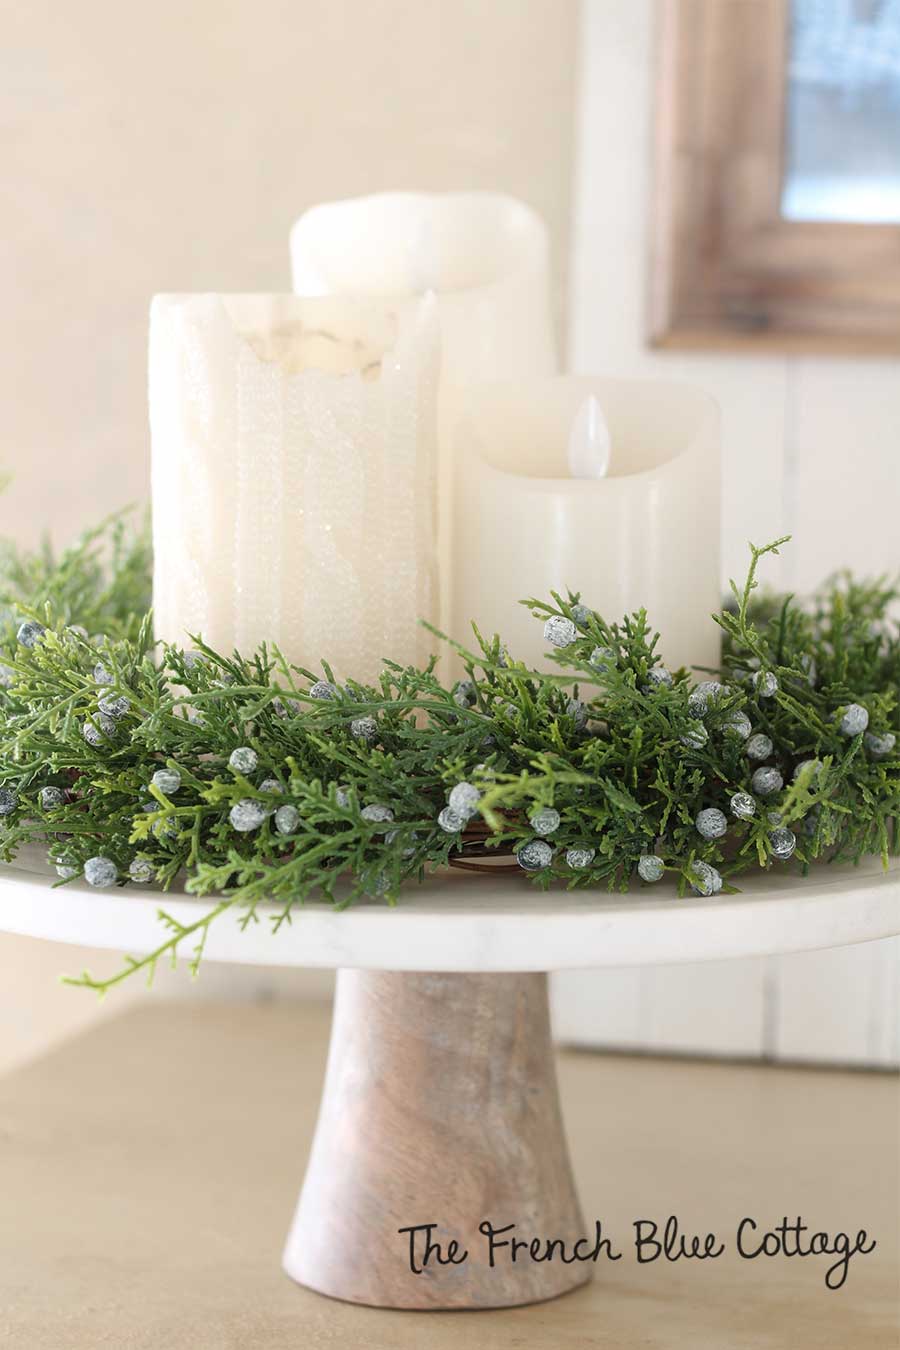 Candles on a cake stand with winter wreath.